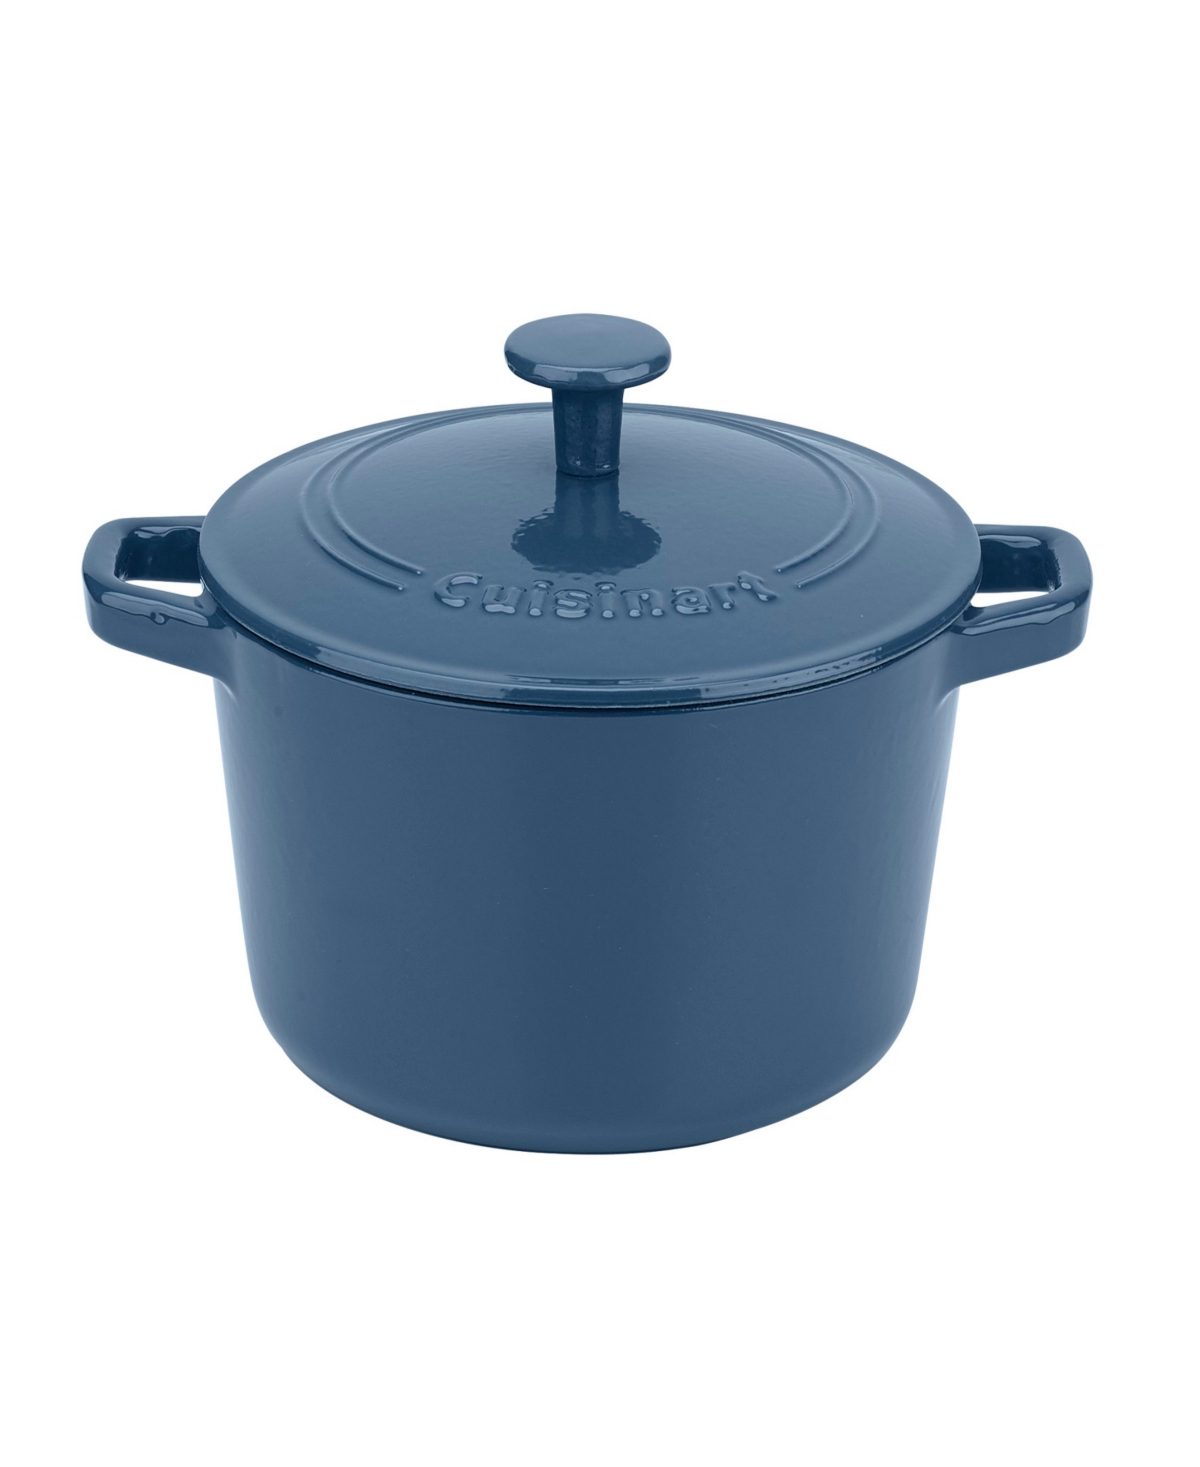 Cuisinart Chefs Classic Enameled Cast Iron 3-qt. Round Covered Casserole In Provencal Blue